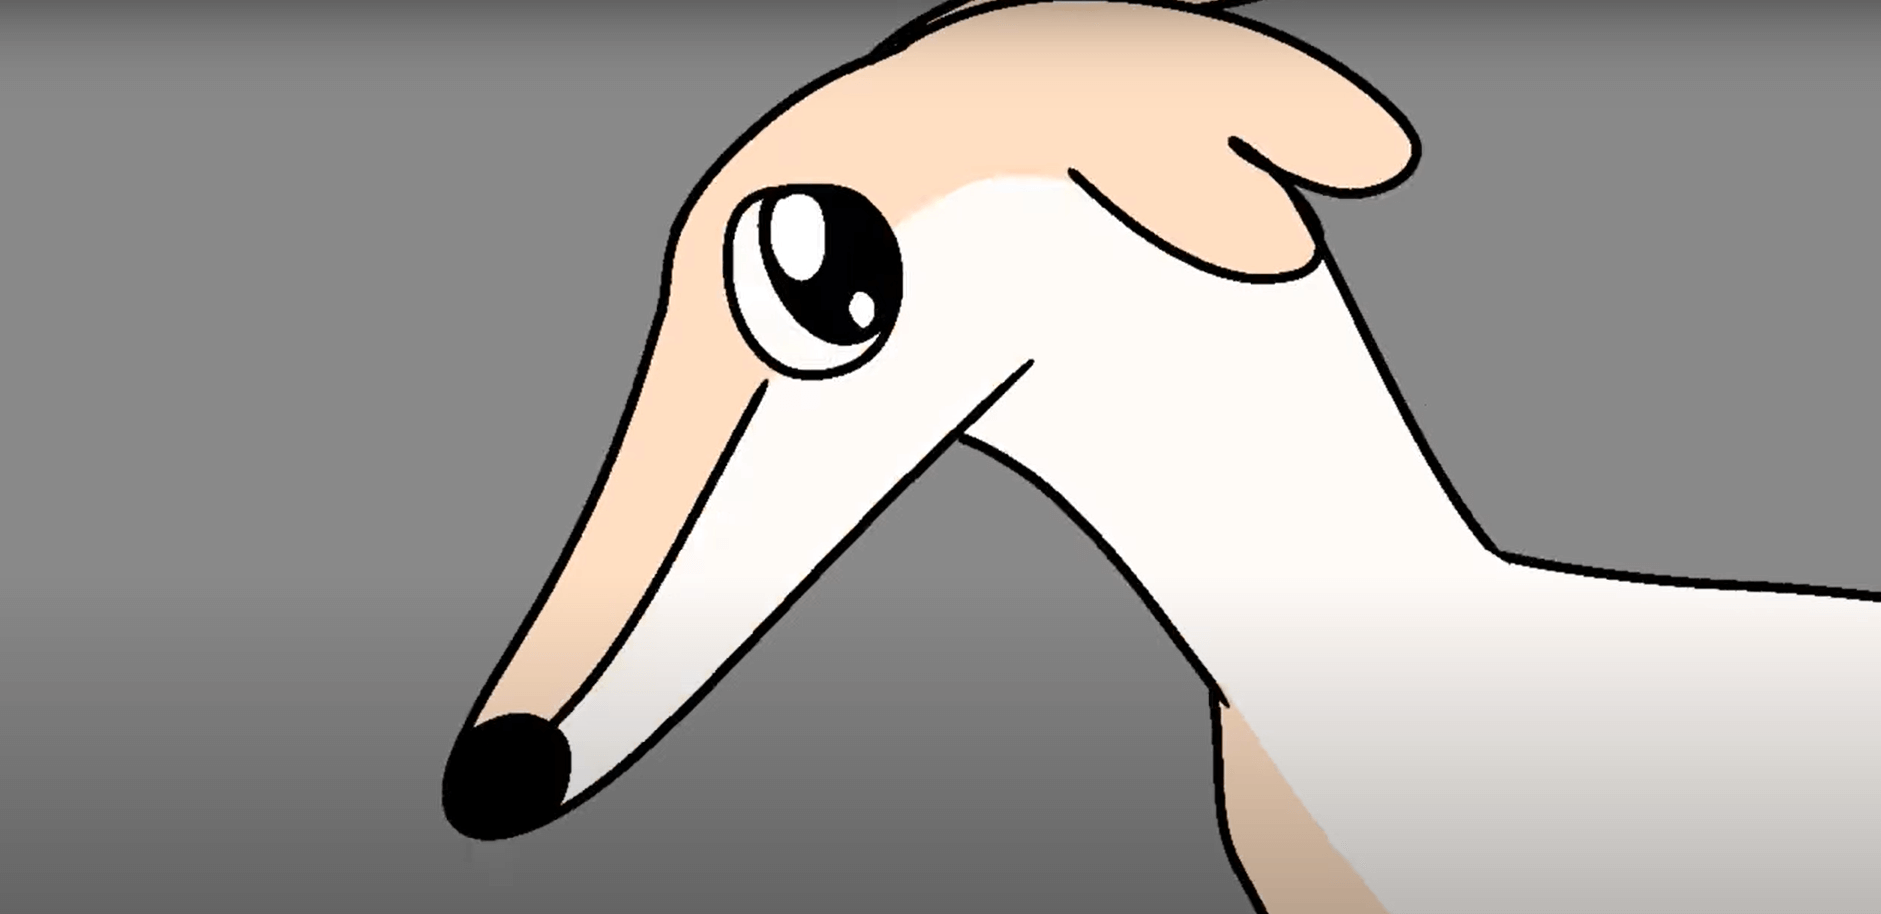 The Long-Nose Dog Meme: What’s Behind “Didn’t I do it for you”